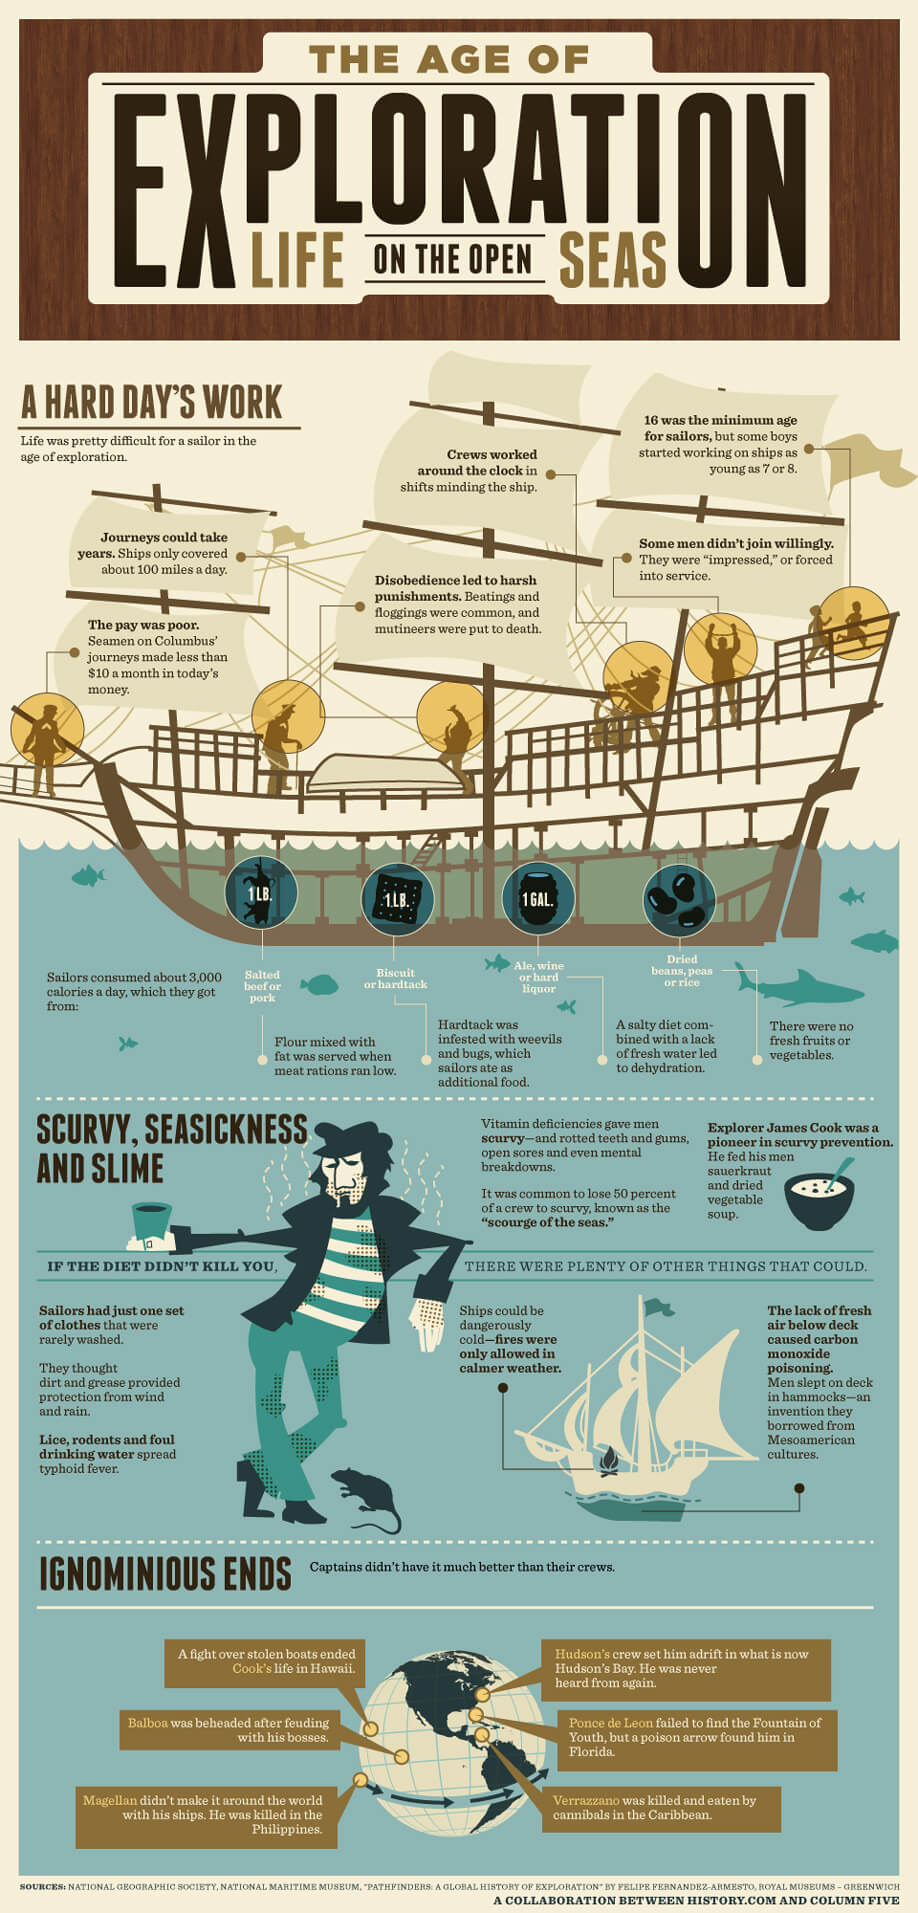 All the sailing in a poster infographic 